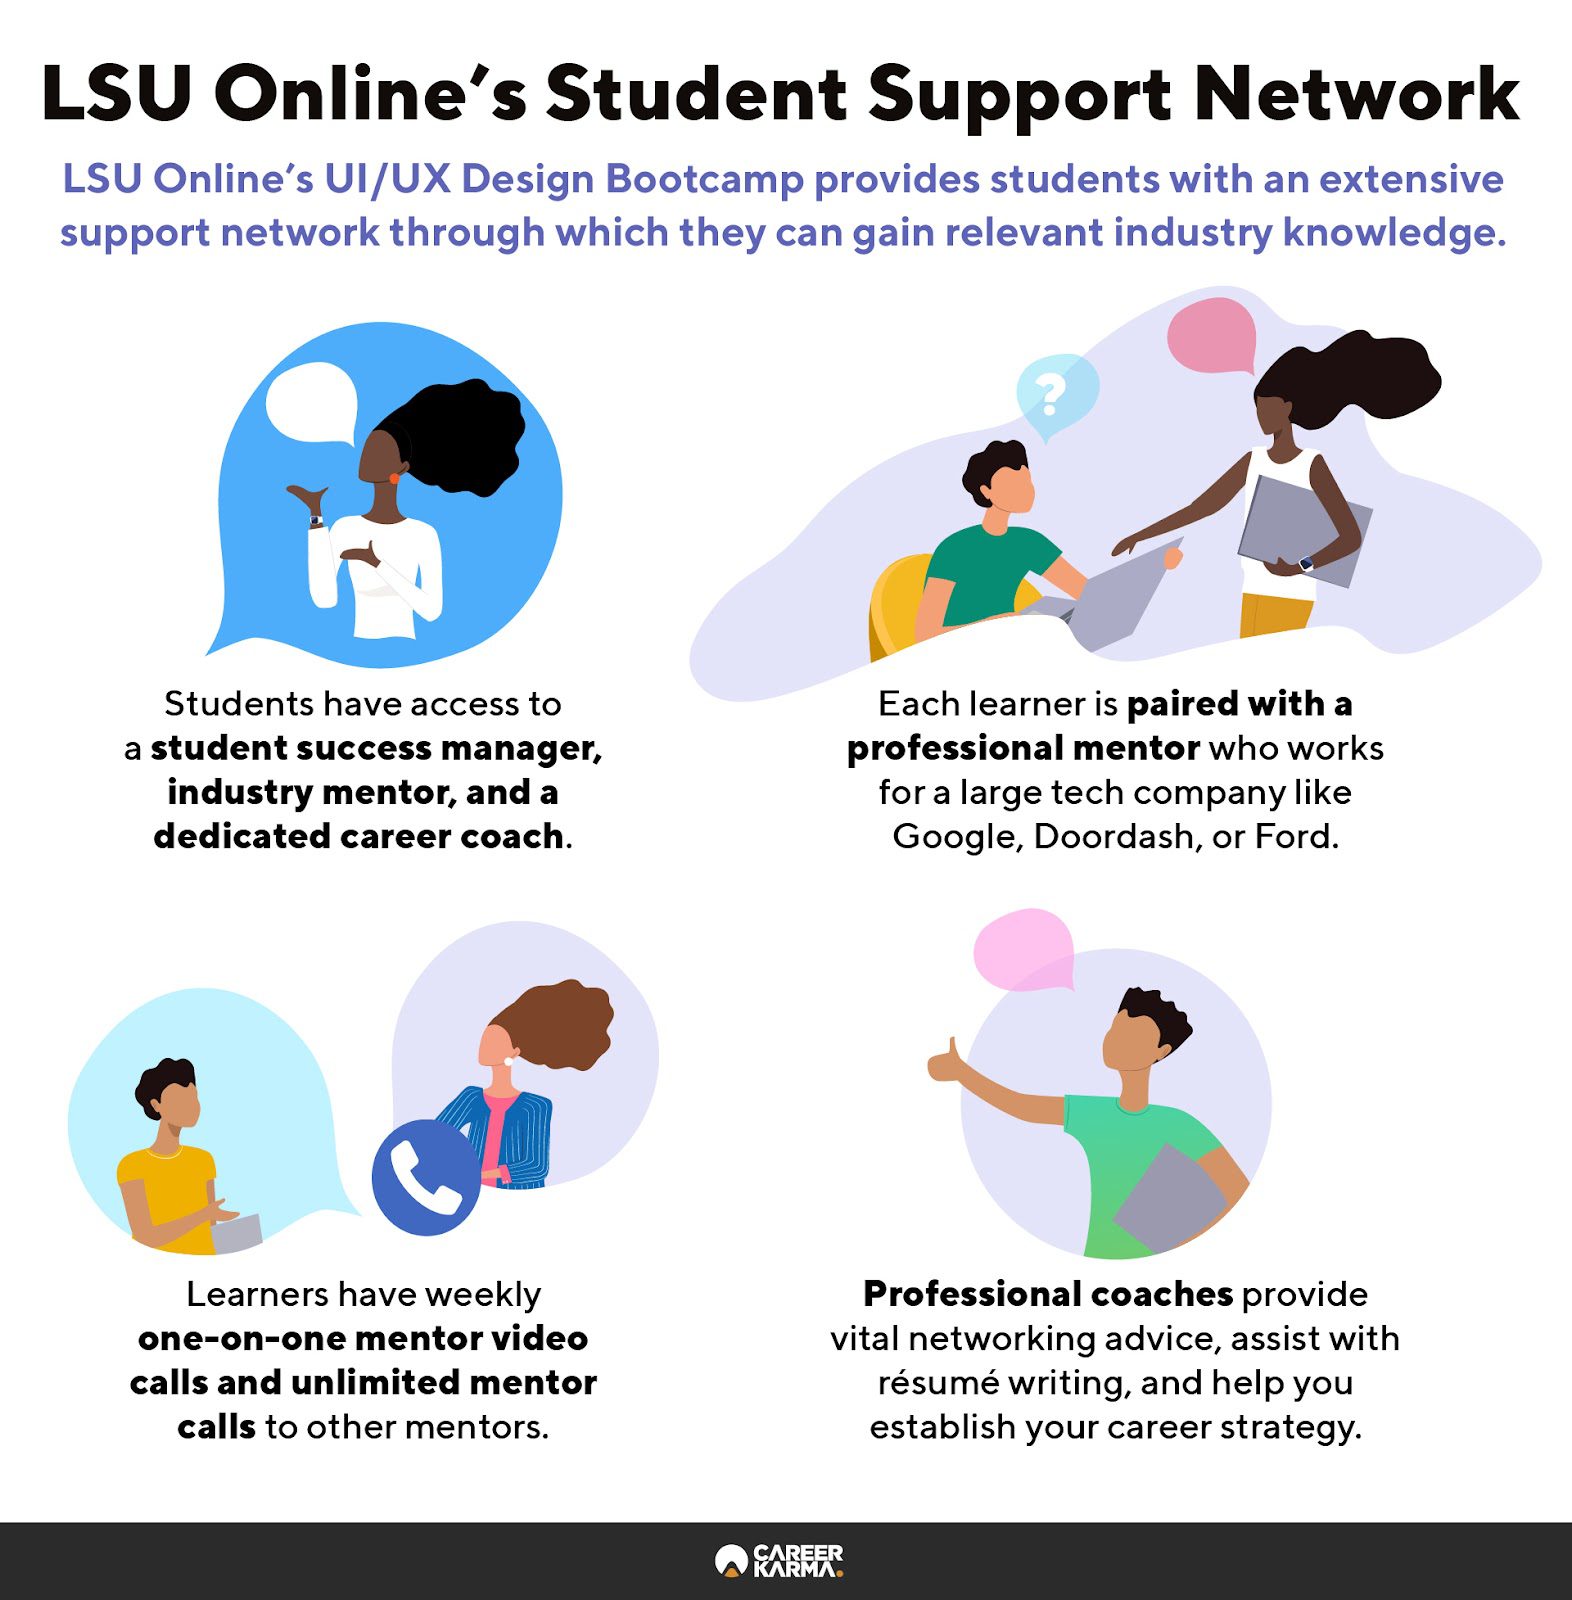 An infographic featuring LSU Online’s student support network